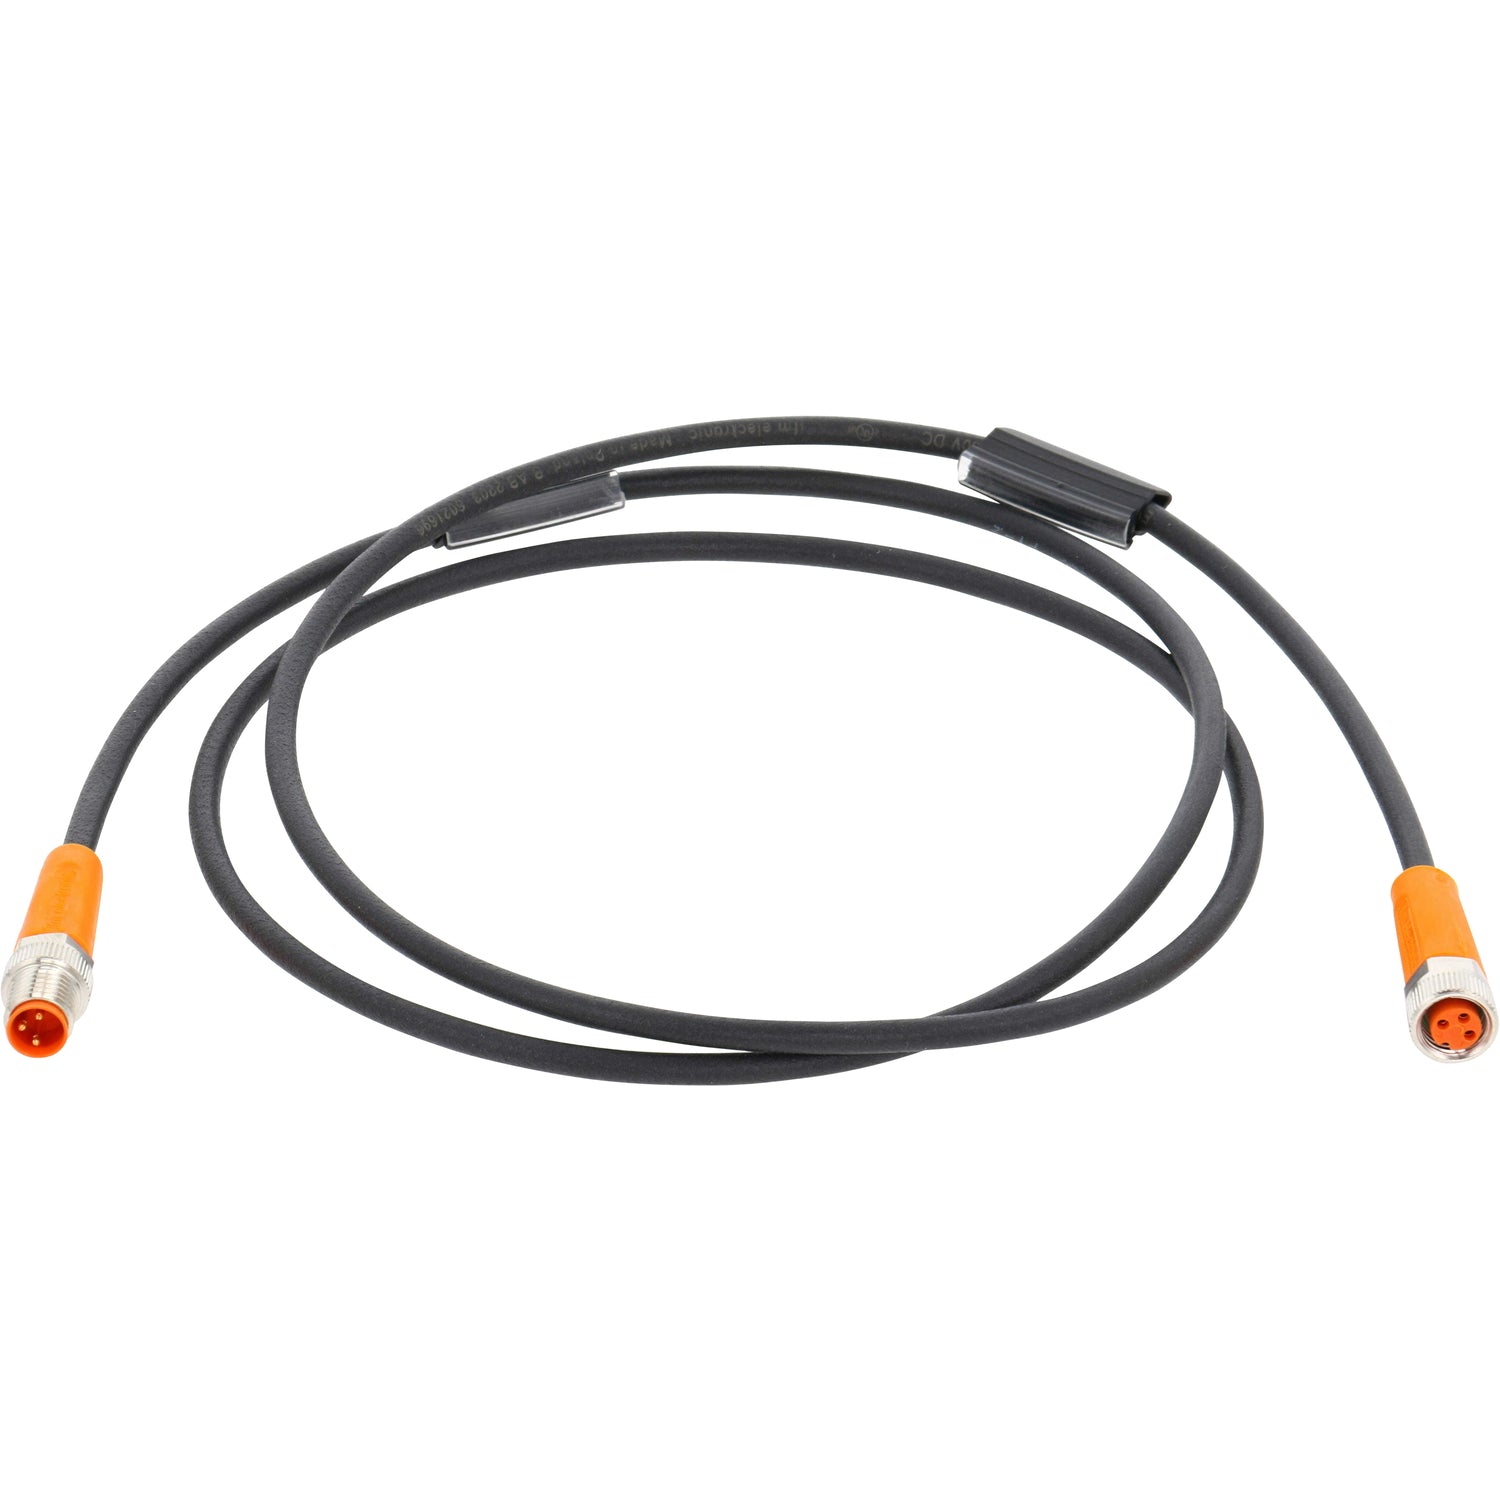 Black, coiled connecting cable with orange molded connections on each end. Sensor cable is shown on a white back ground. EVC267